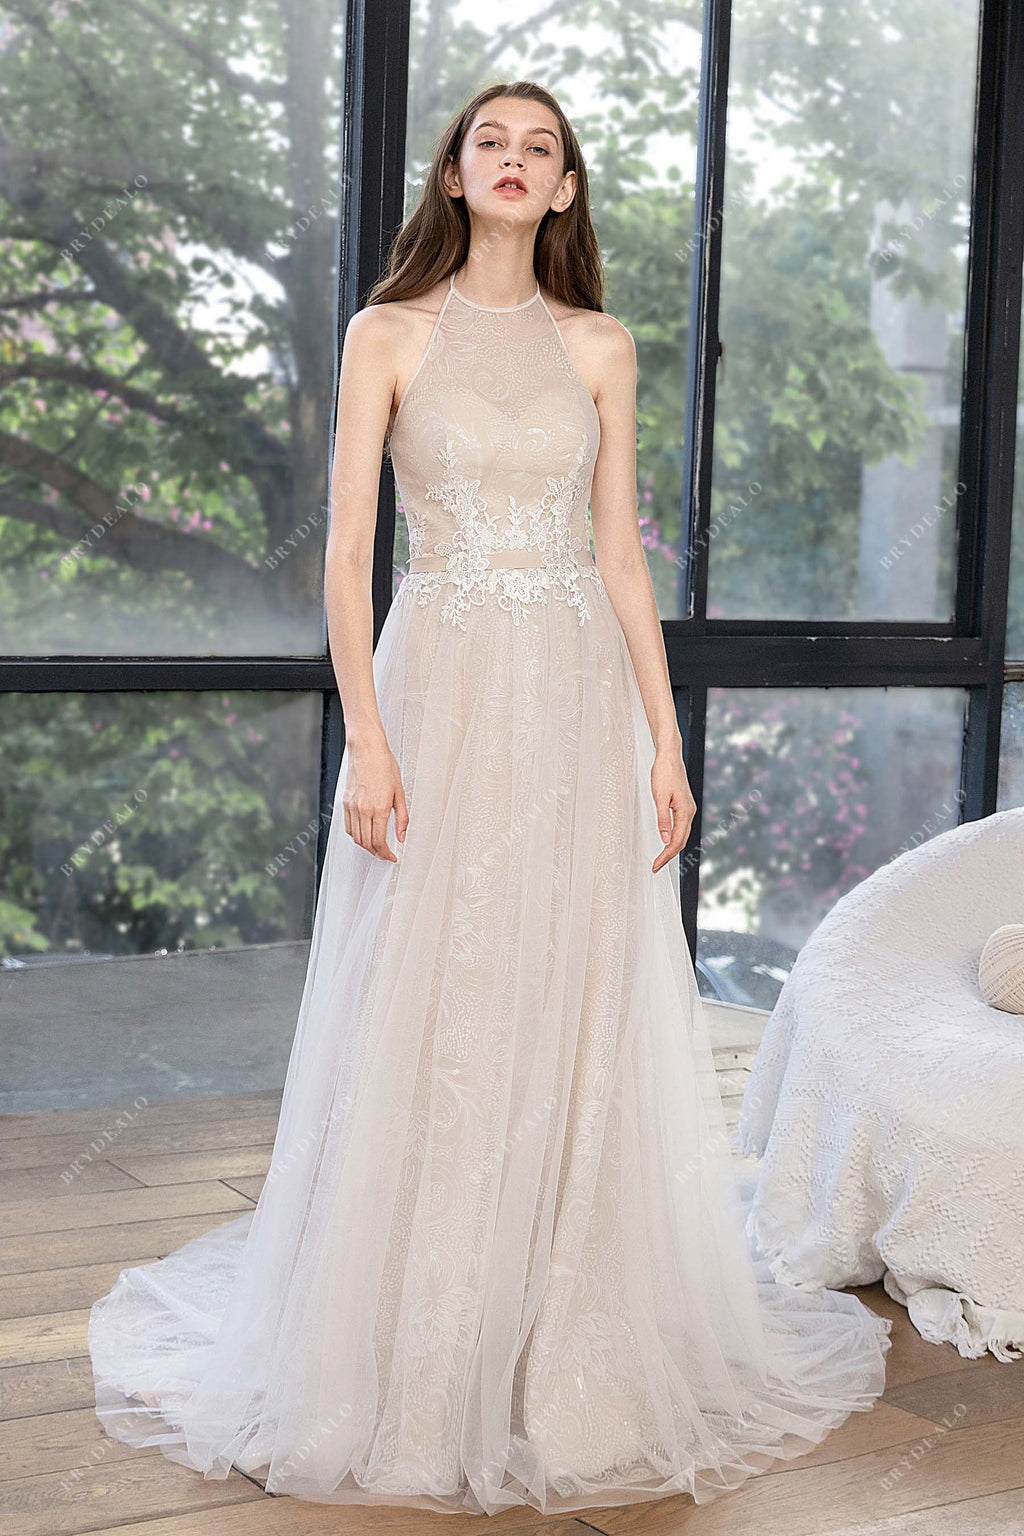 Dreamy Lace Tulle Plunging Neck Spring A-line Wedding Dress